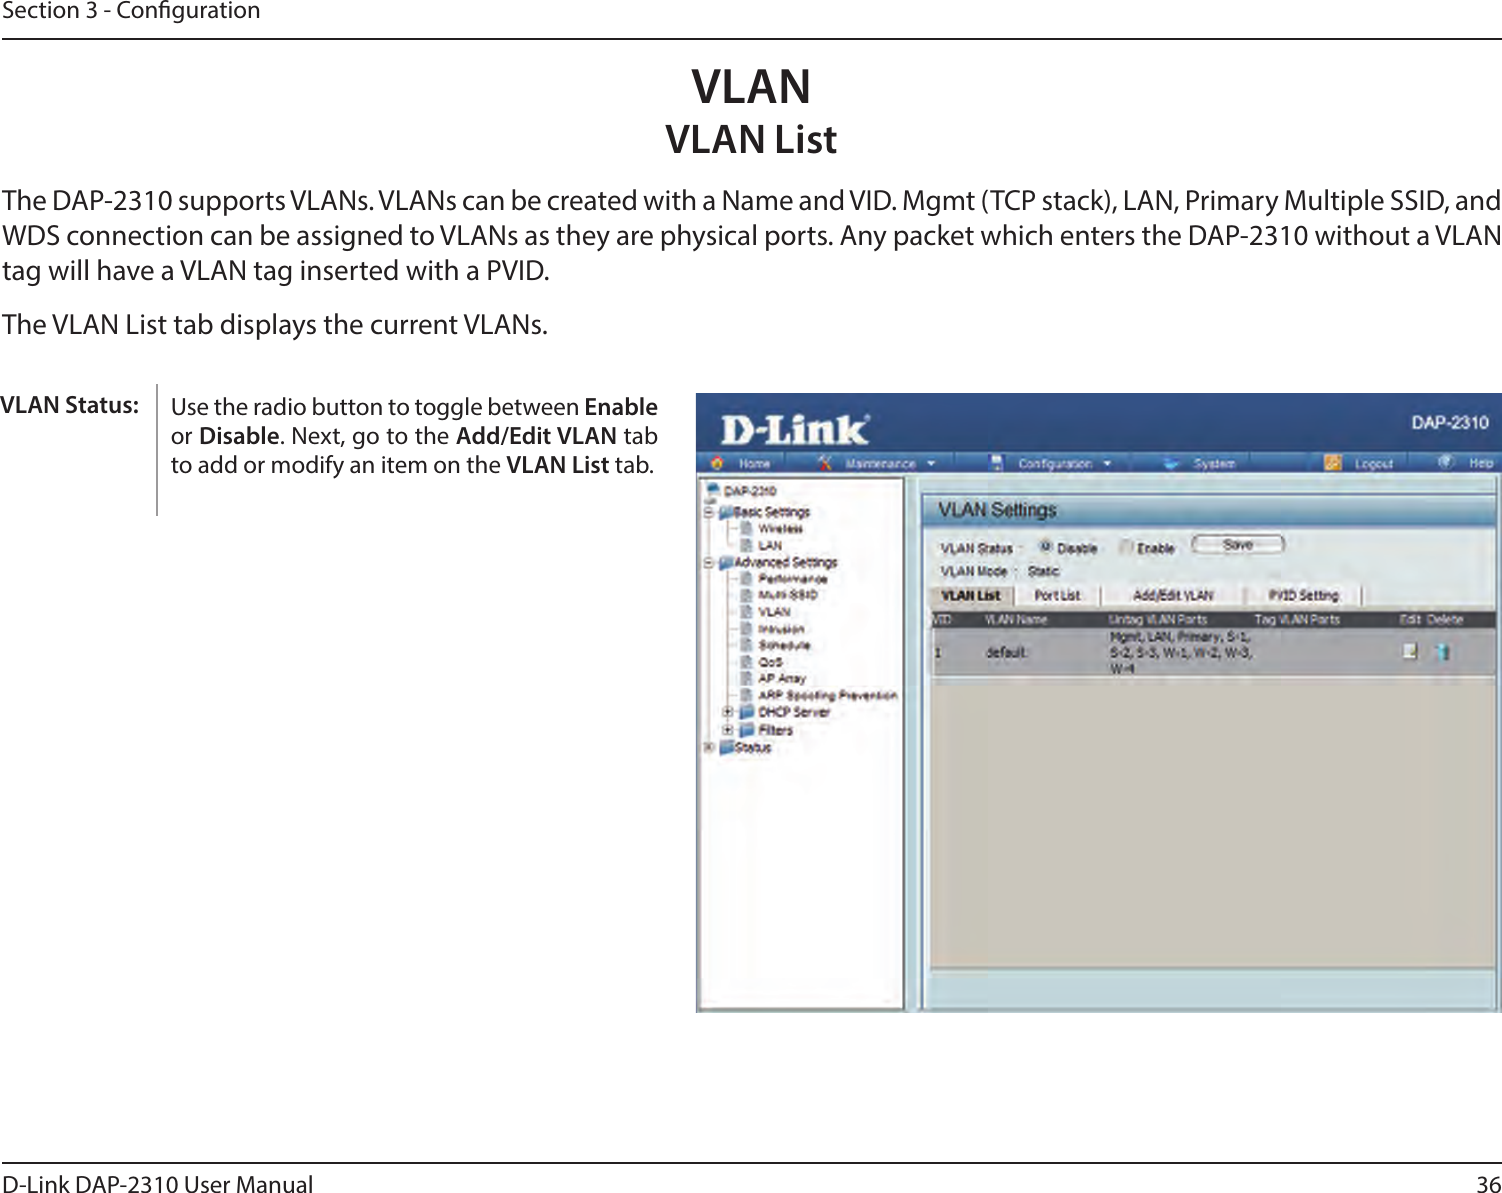 36D-Link DAP-2310 User ManualSection 3 - CongurationVLANVLAN ListThe DAP-2310 supports VLANs. VLANs can be created with a Name and VID. Mgmt (TCP stack), LAN, Primary Multiple SSID, and WDS connection can be assigned to VLANs as they are physical ports. Any packet which enters the DAP-2310 without a VLAN tag will have a VLAN tag inserted with a PVID.The VLAN List tab displays the current VLANs.Use the radio button to toggle between Enable or Disable. Next, go to the Add/Edit VLAN tab to add or modify an item on the VLAN List tab. VLAN Status: